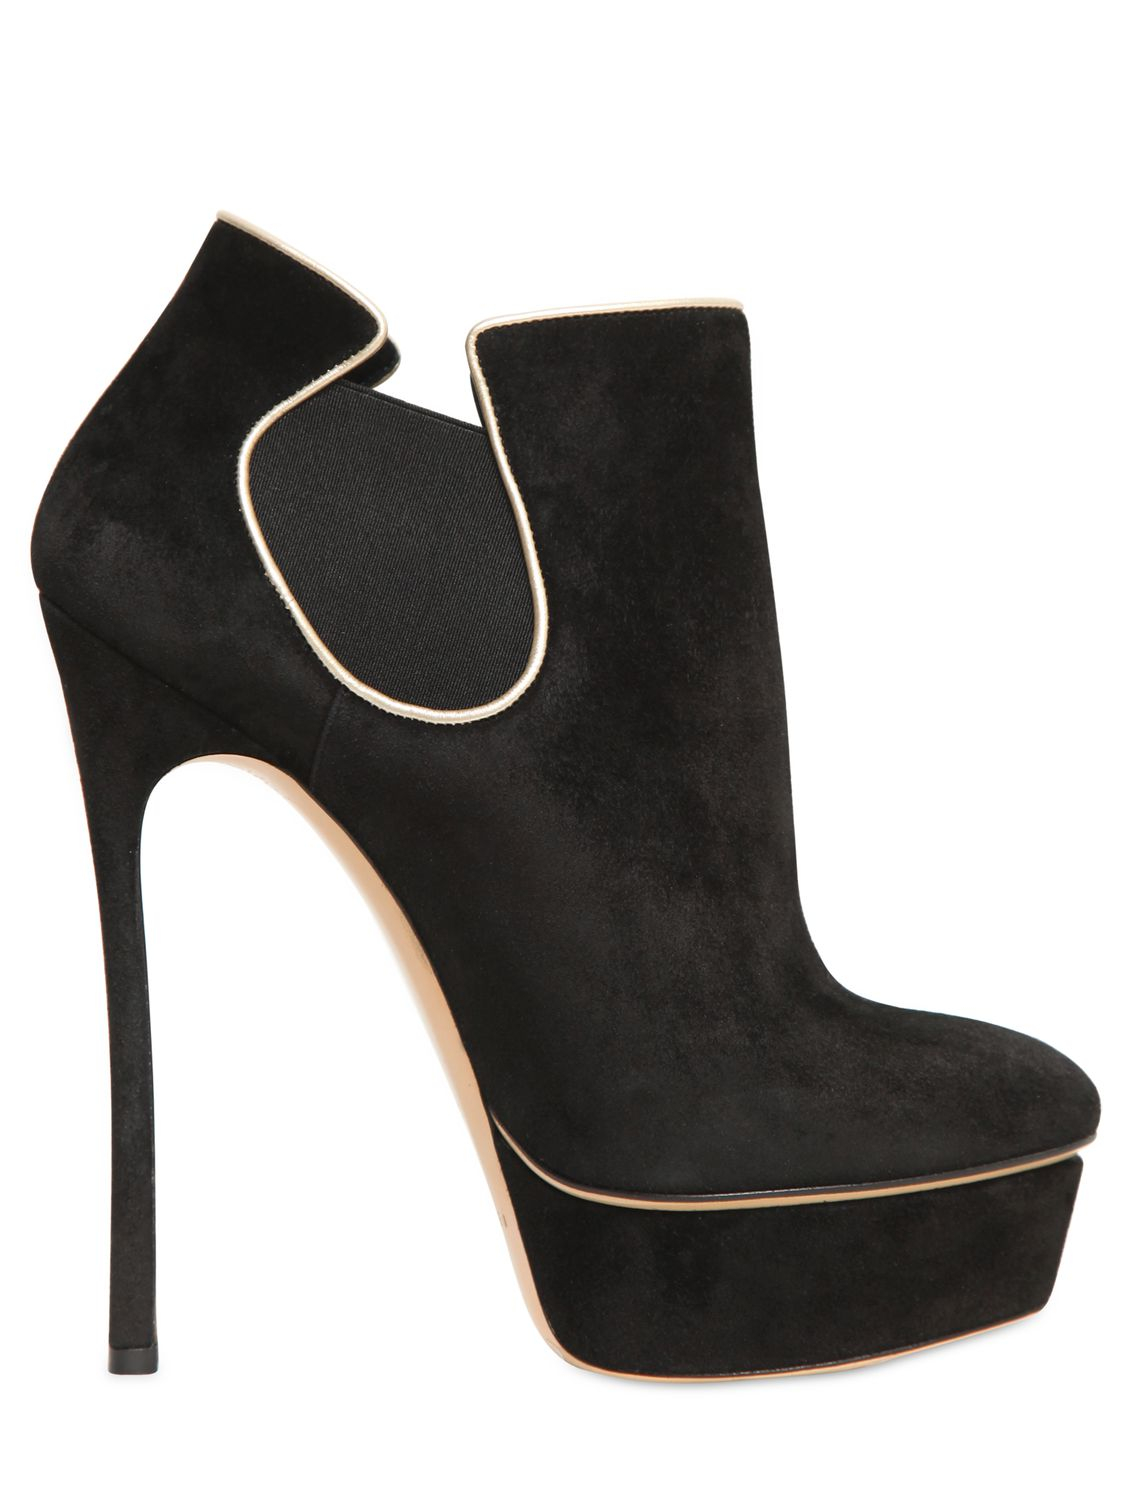 Lyst - Casadei 150mm Suede Low Boots in Black